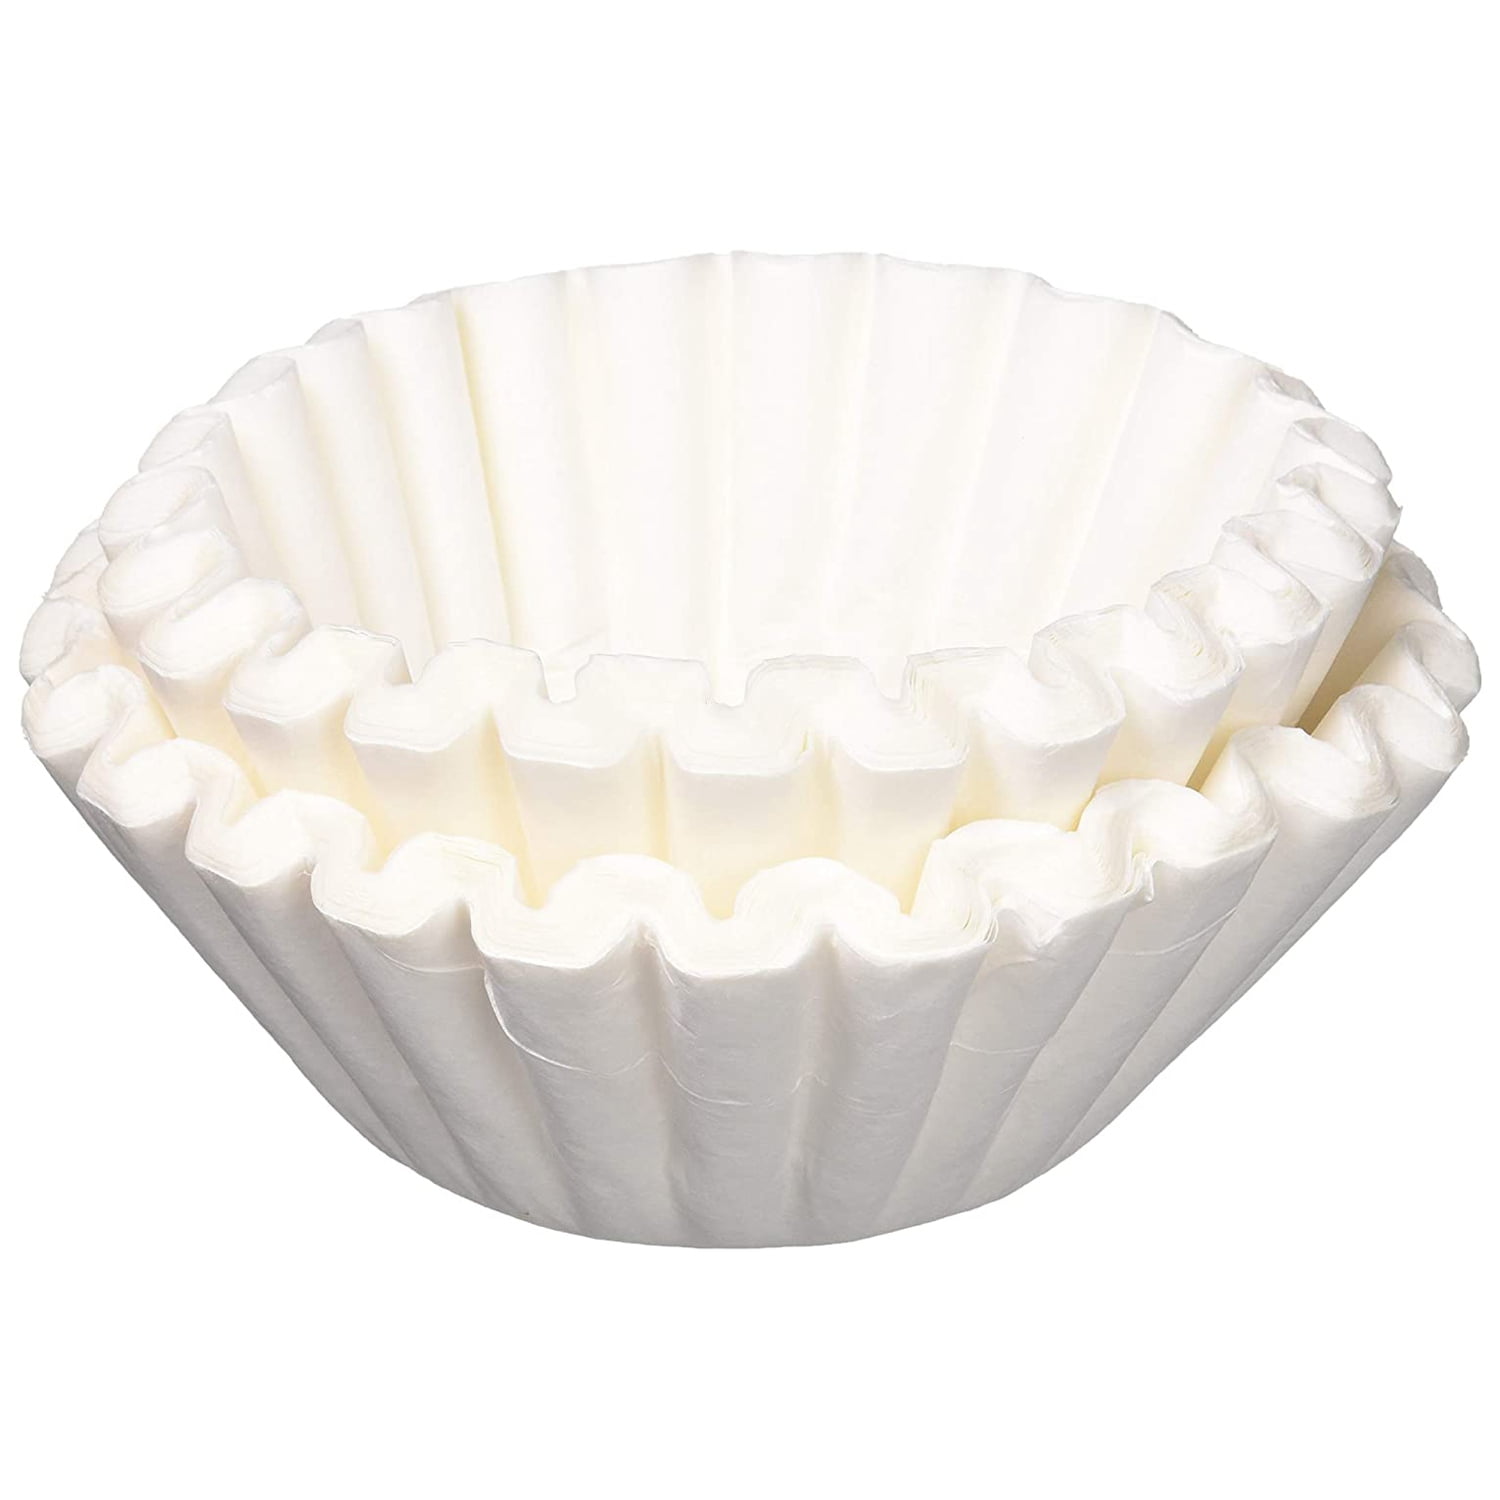 500pcs Disposable Paper Filters Cups Replacement Filter For Keurig K-Cup Coffee 